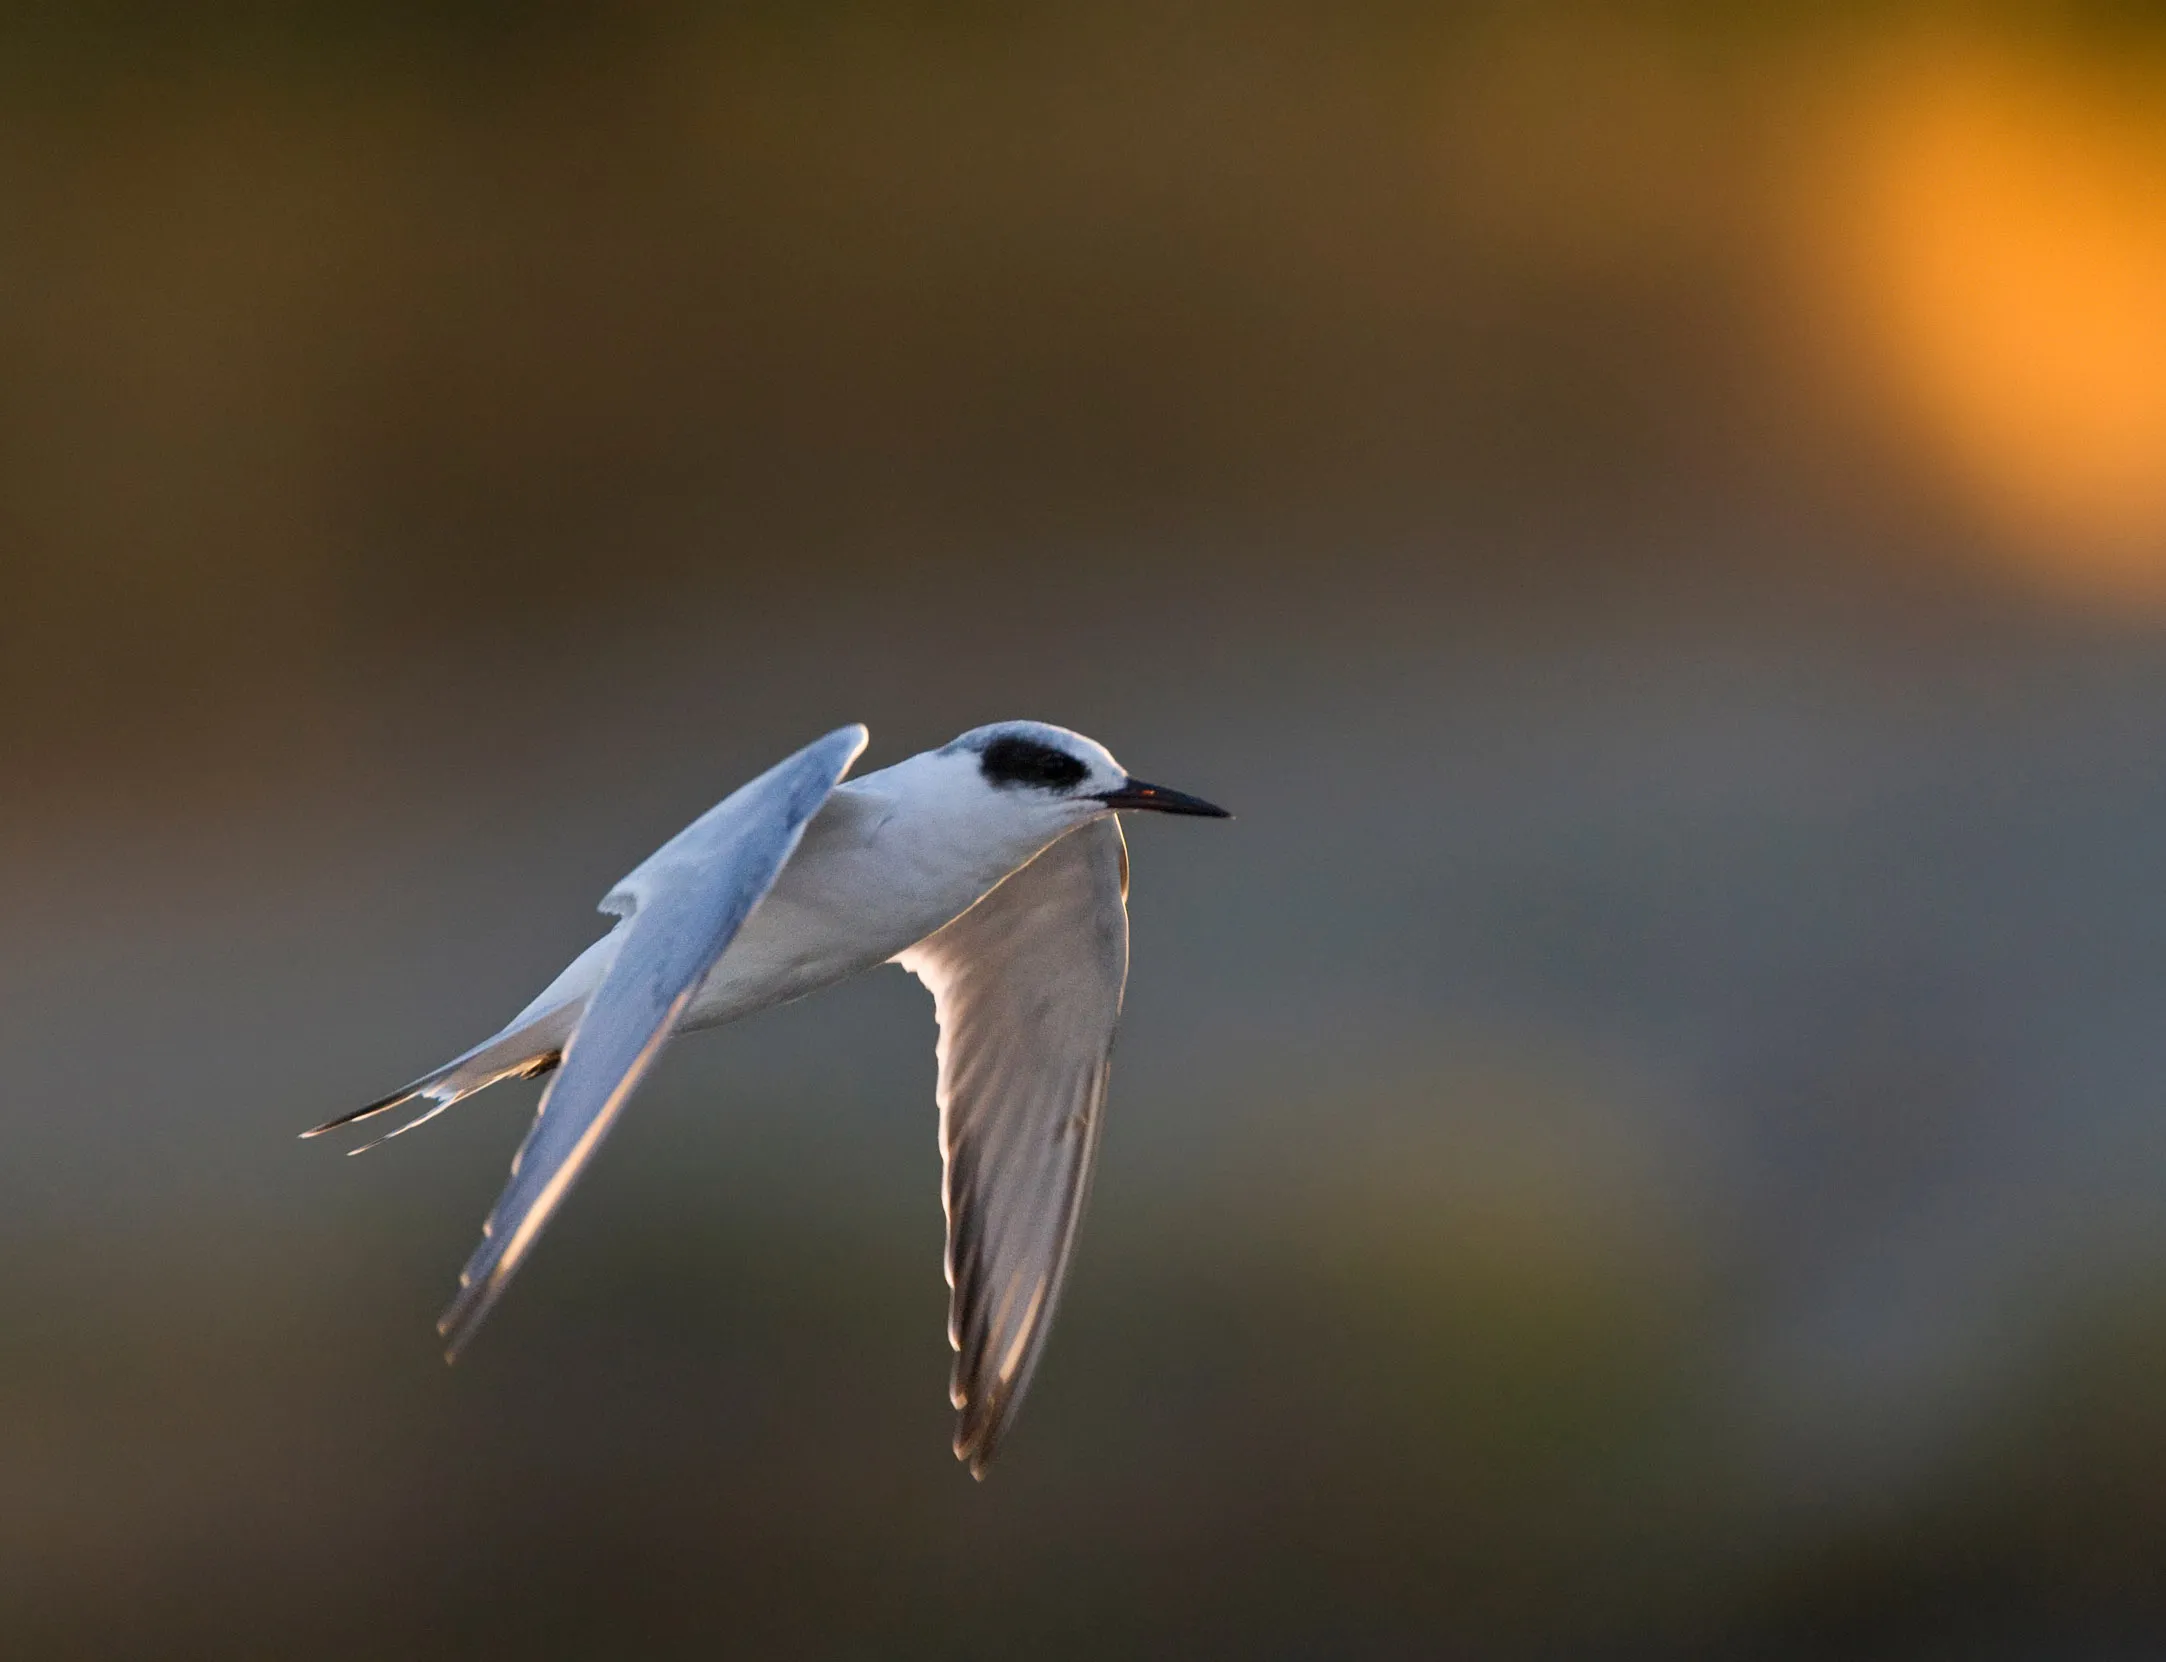 A lone Foster's Tern flying in an autumn sky.